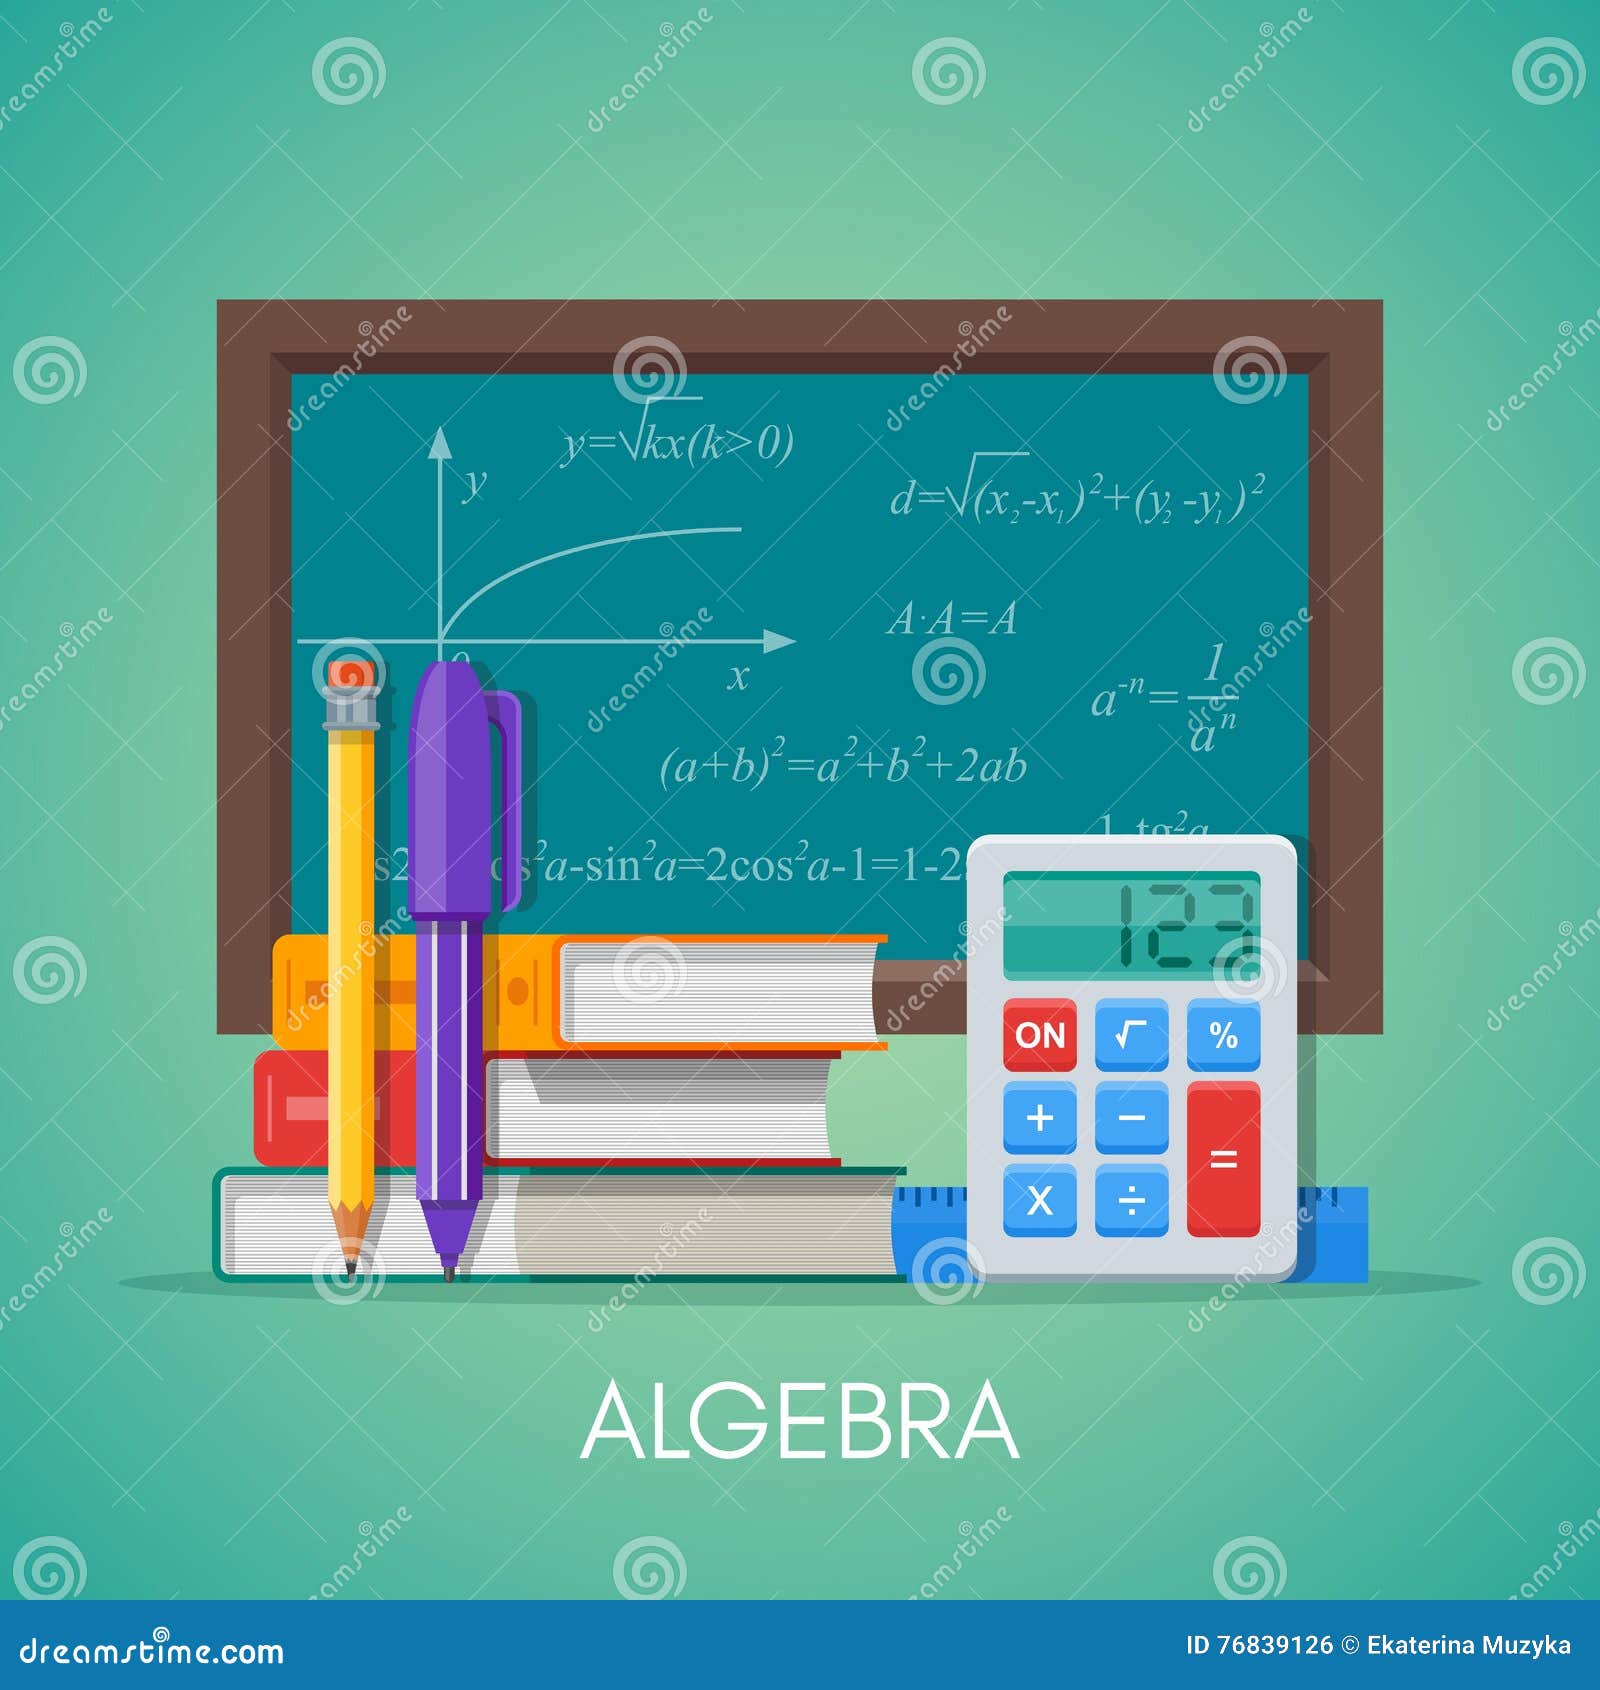 algebra math science education concept  poster in flat style 